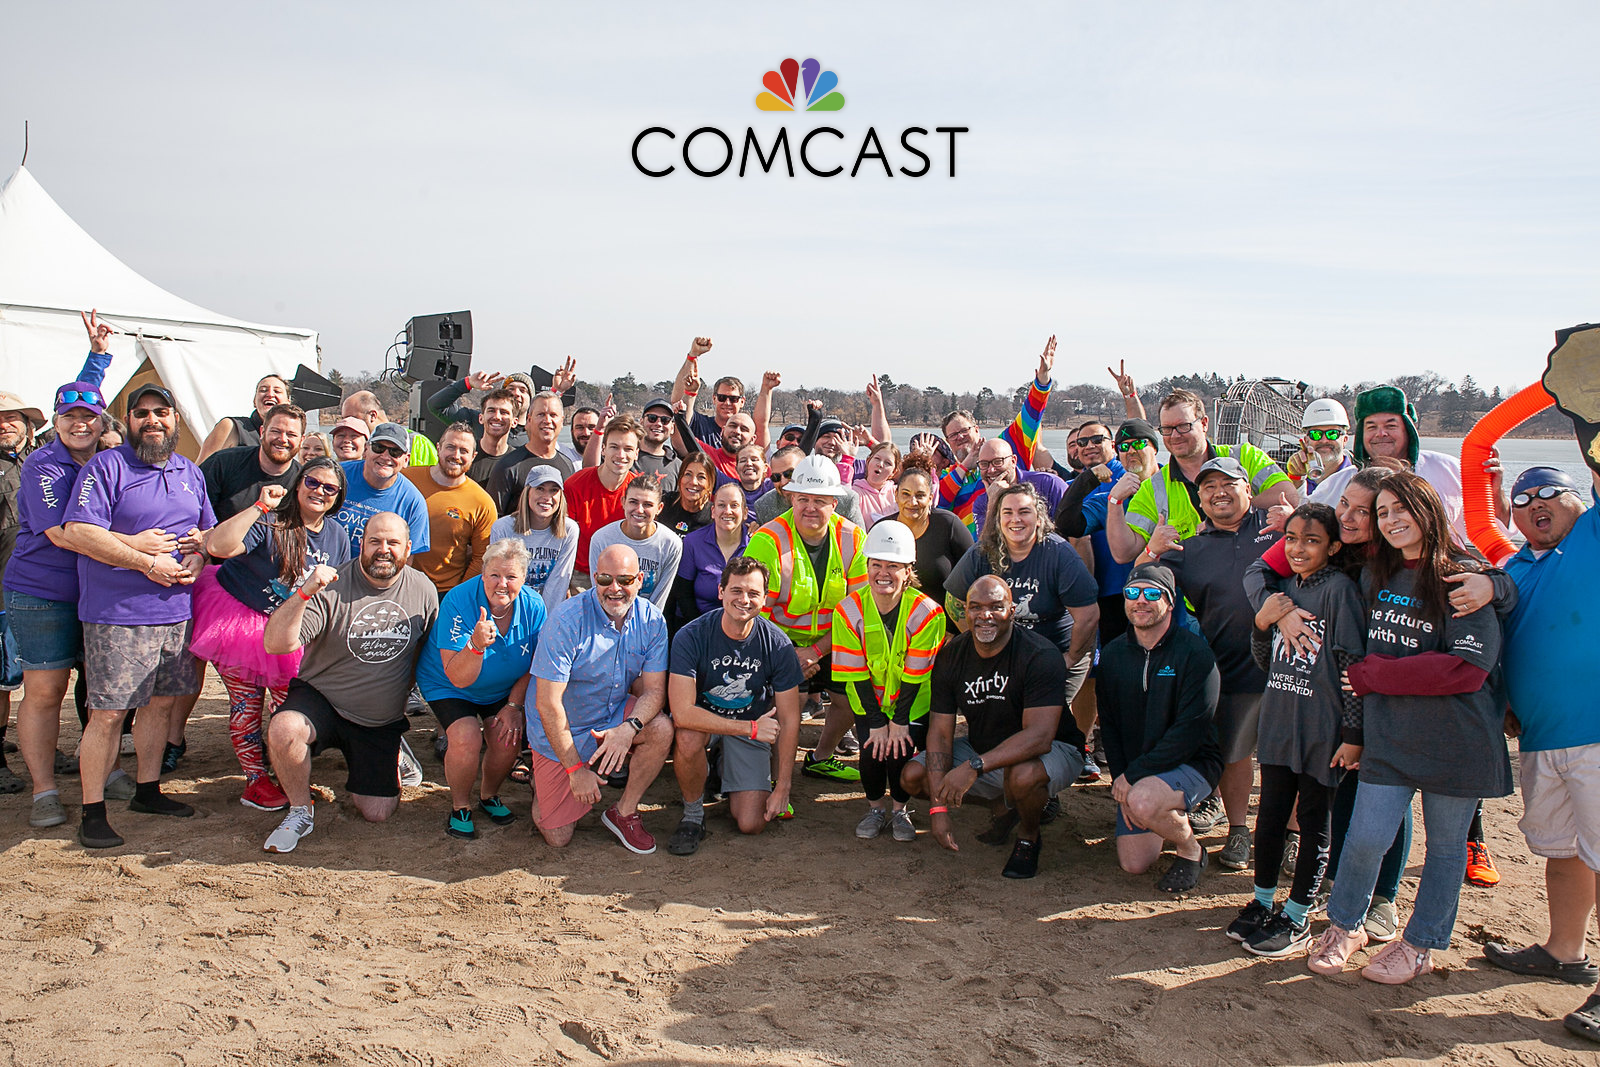 Polar Plunge participants from Comcast Midwest Region pose for a photo before their big jump